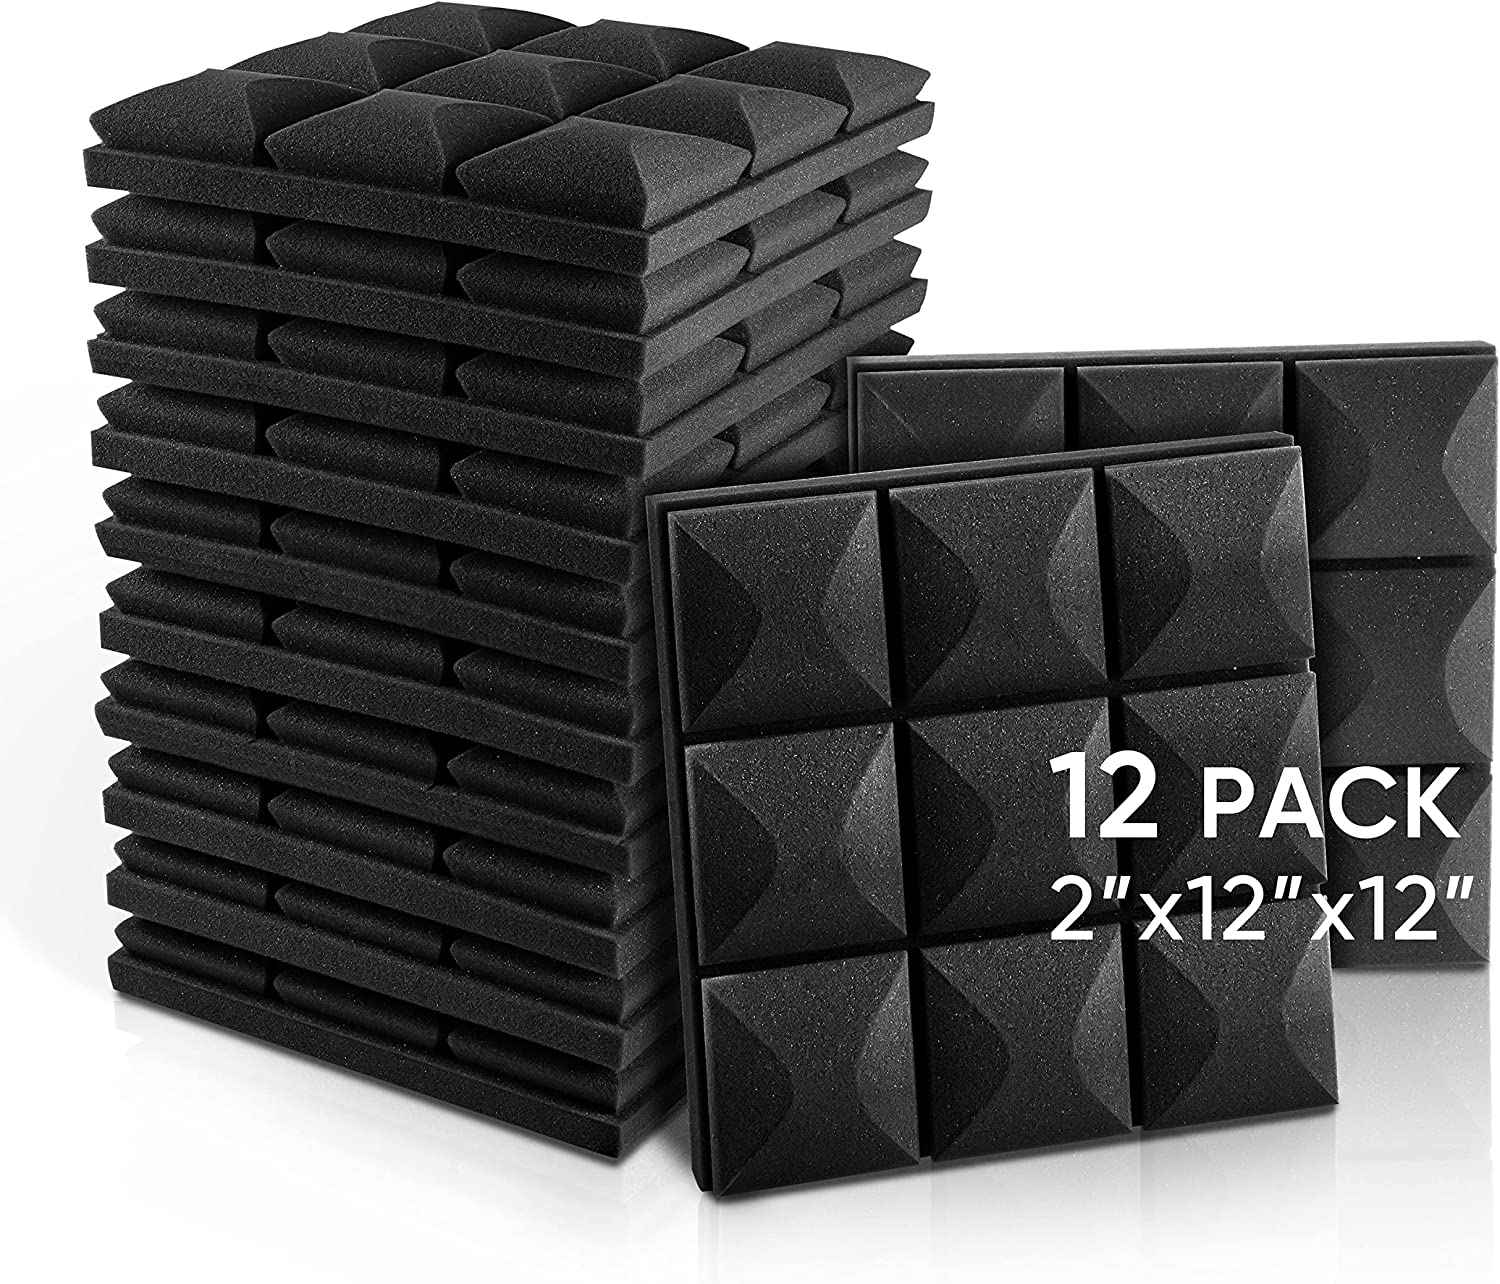 Fstop Labs Acoustic Foam Panels on a white background